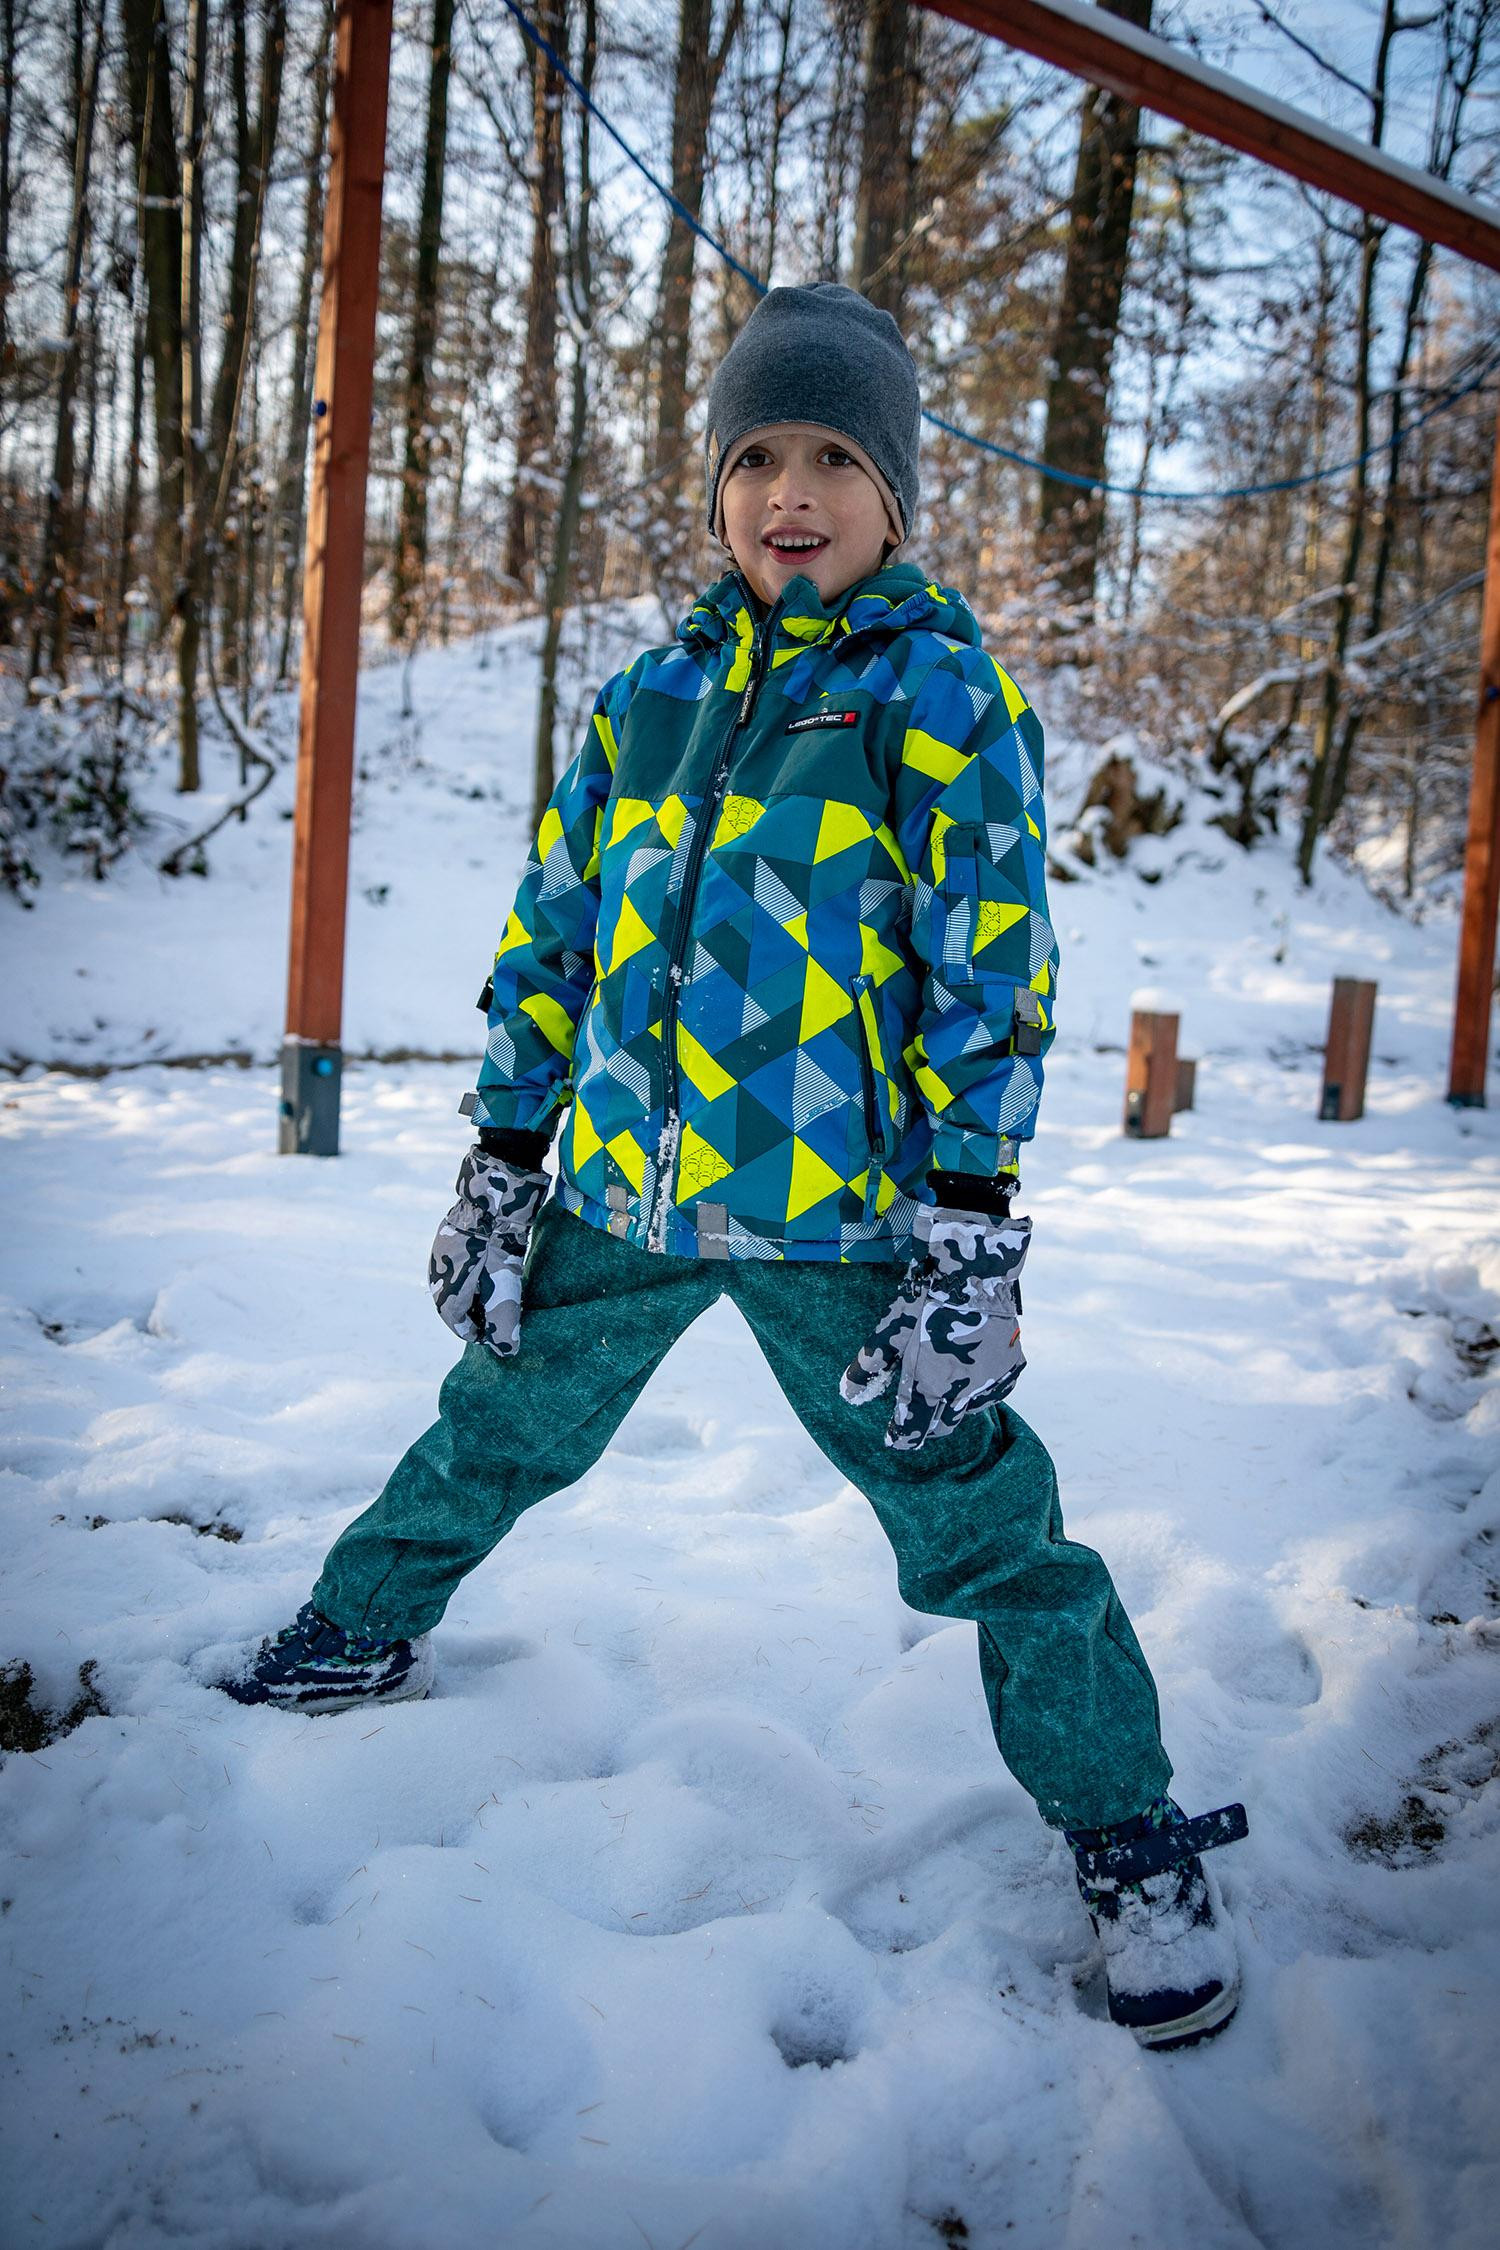 CHILDREN'S SOFTSHELL TROUSERS (YETI) - CAMOUFLAGE - classic blue